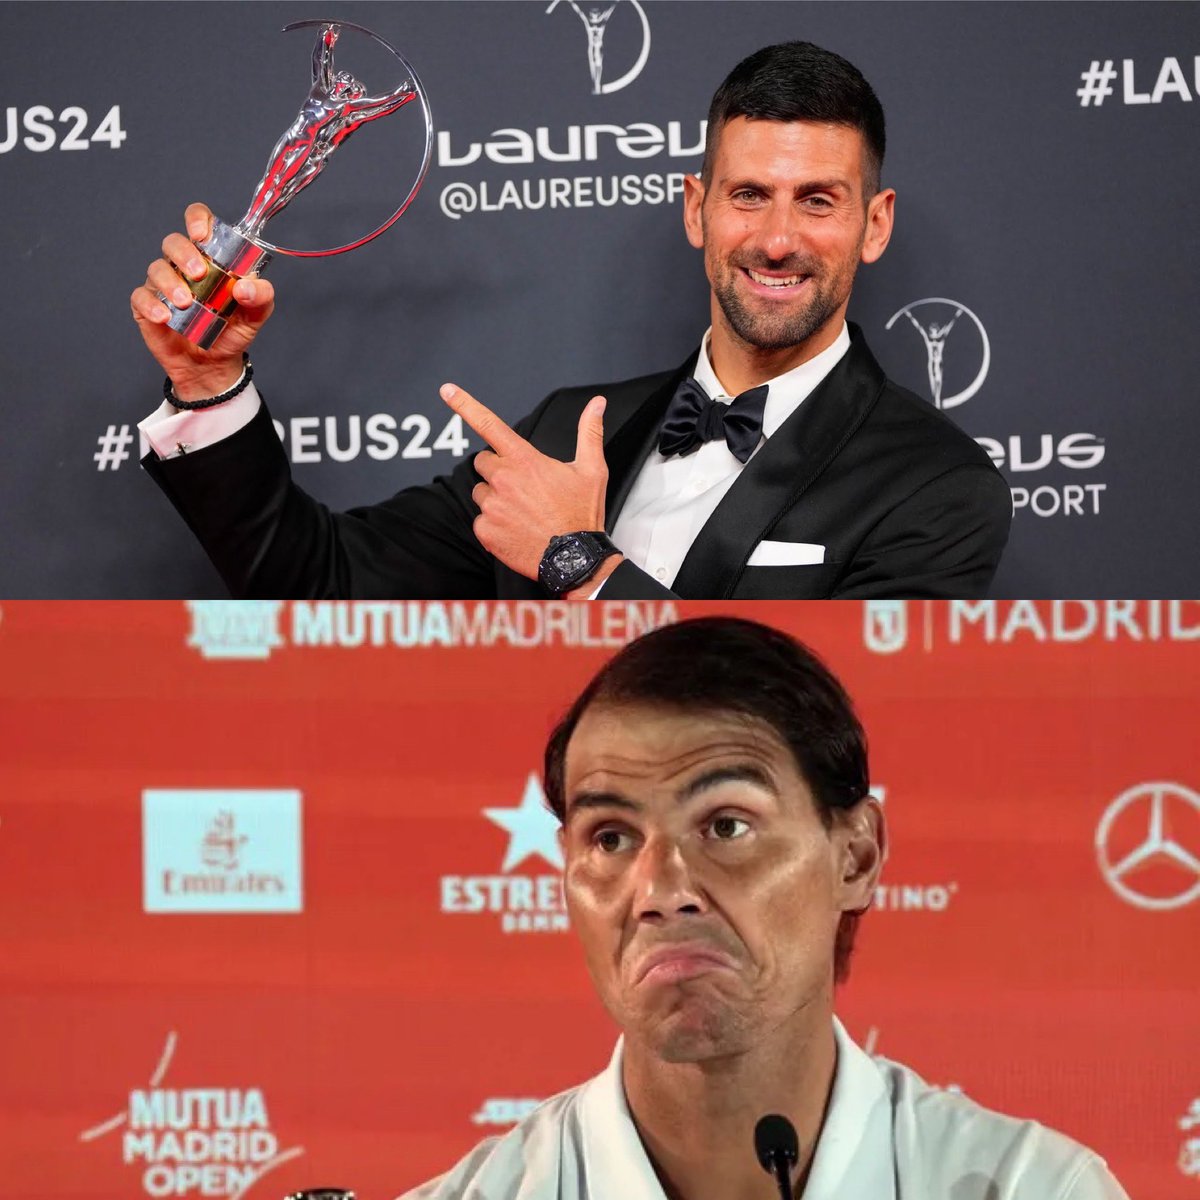 Djokovic is 36 and could pass for 26.
Nadal is 37 and could pass for 47.

I do genuinely wonder if the Covid vaccines have accelerated the ageing process in some people?